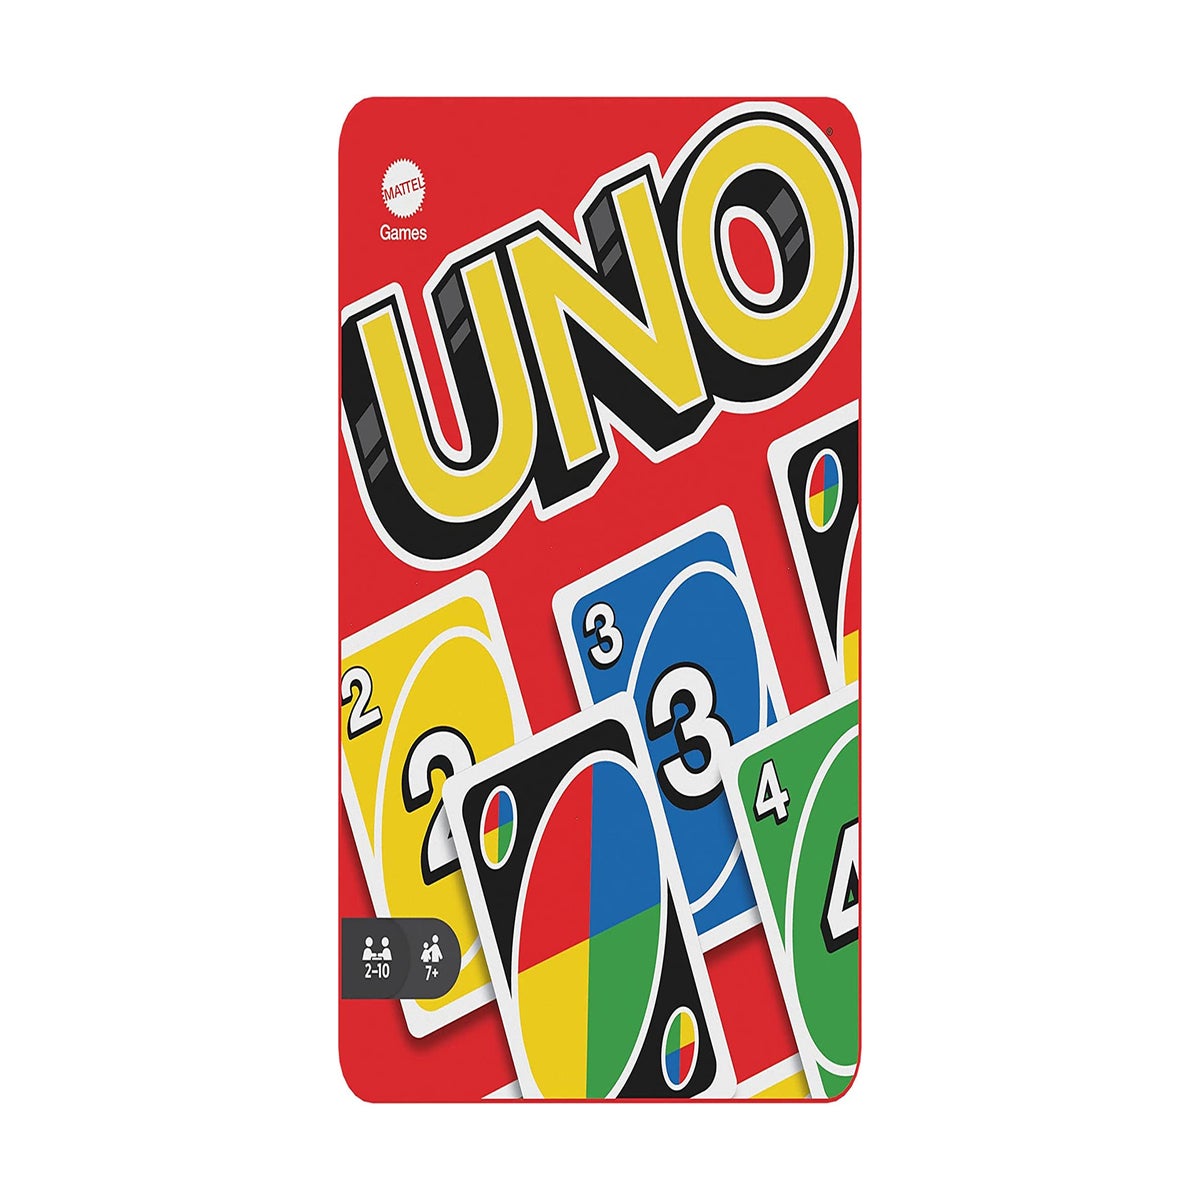 Here's how you can make $17,000 a month playing Uno with new Mattel job